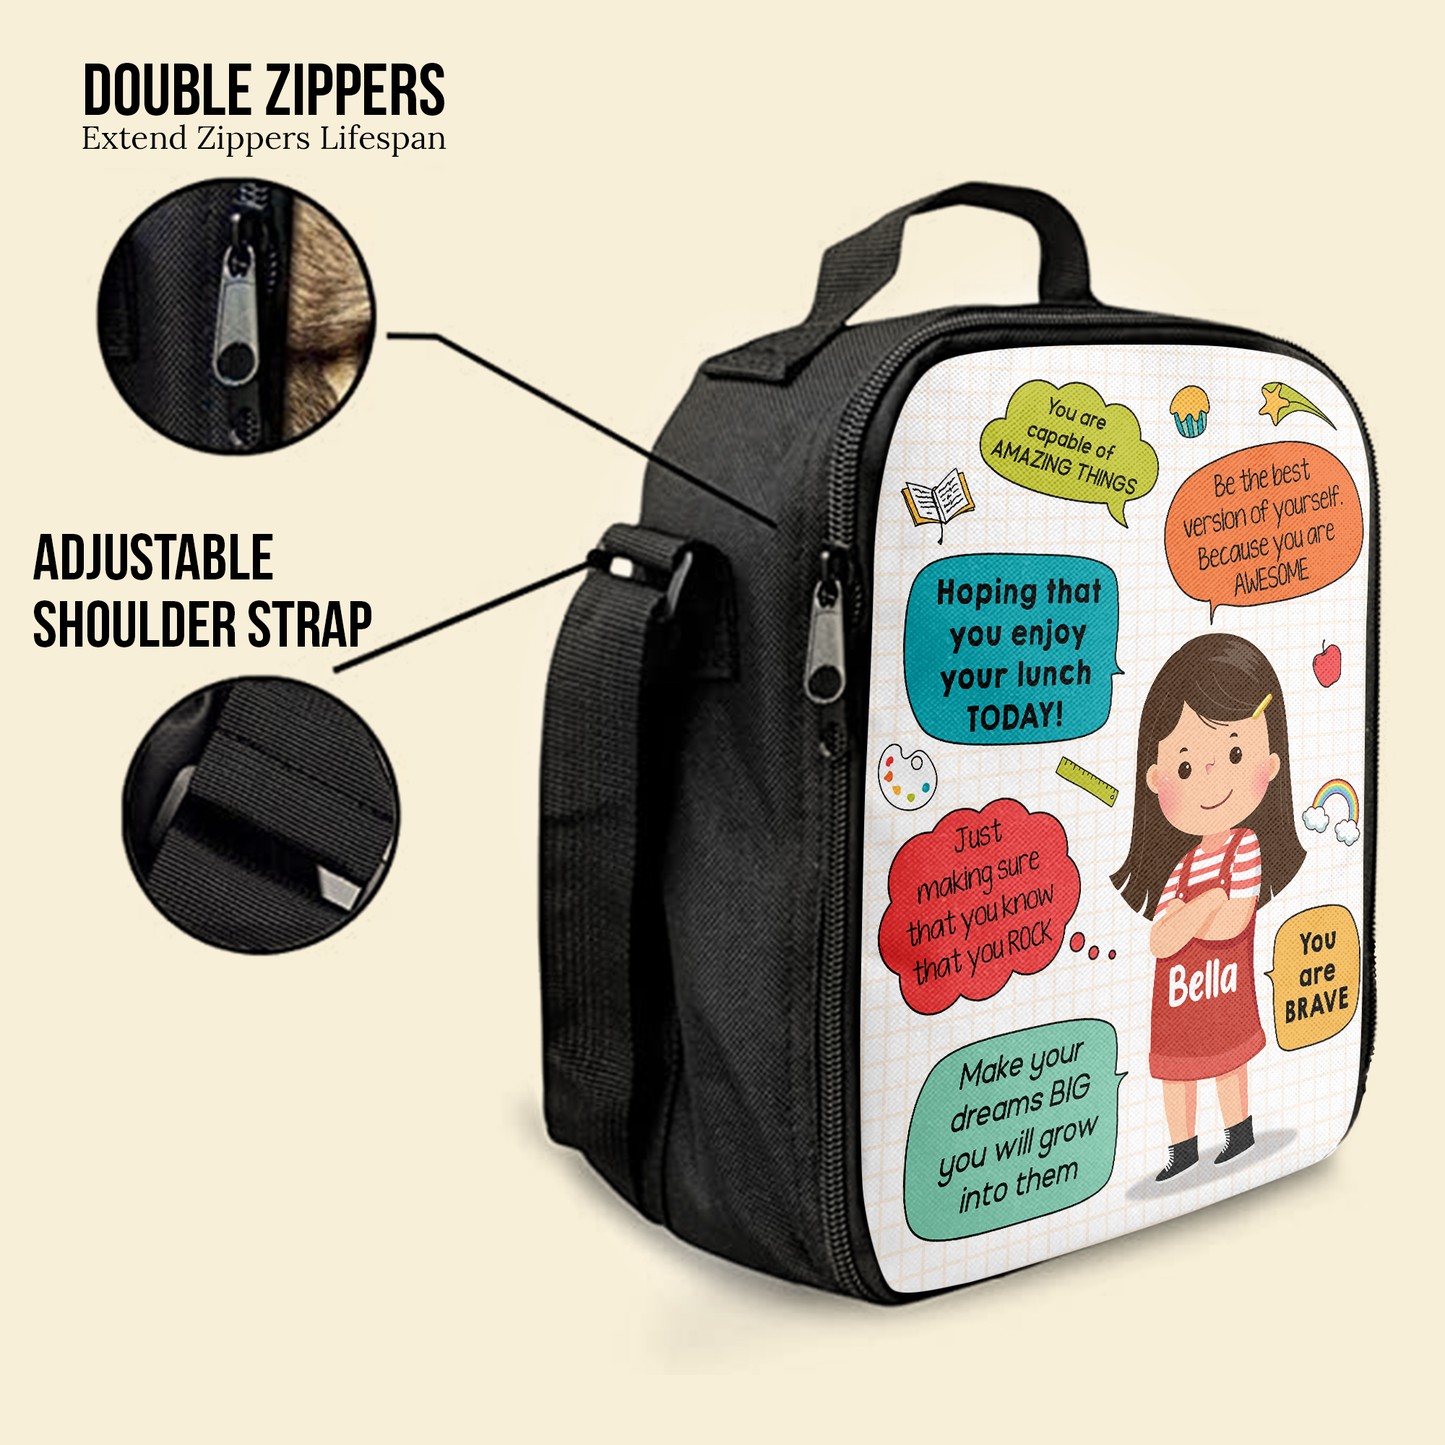 Hoping You Enjoy Your Lunch Today - Personalized Lunch Bag